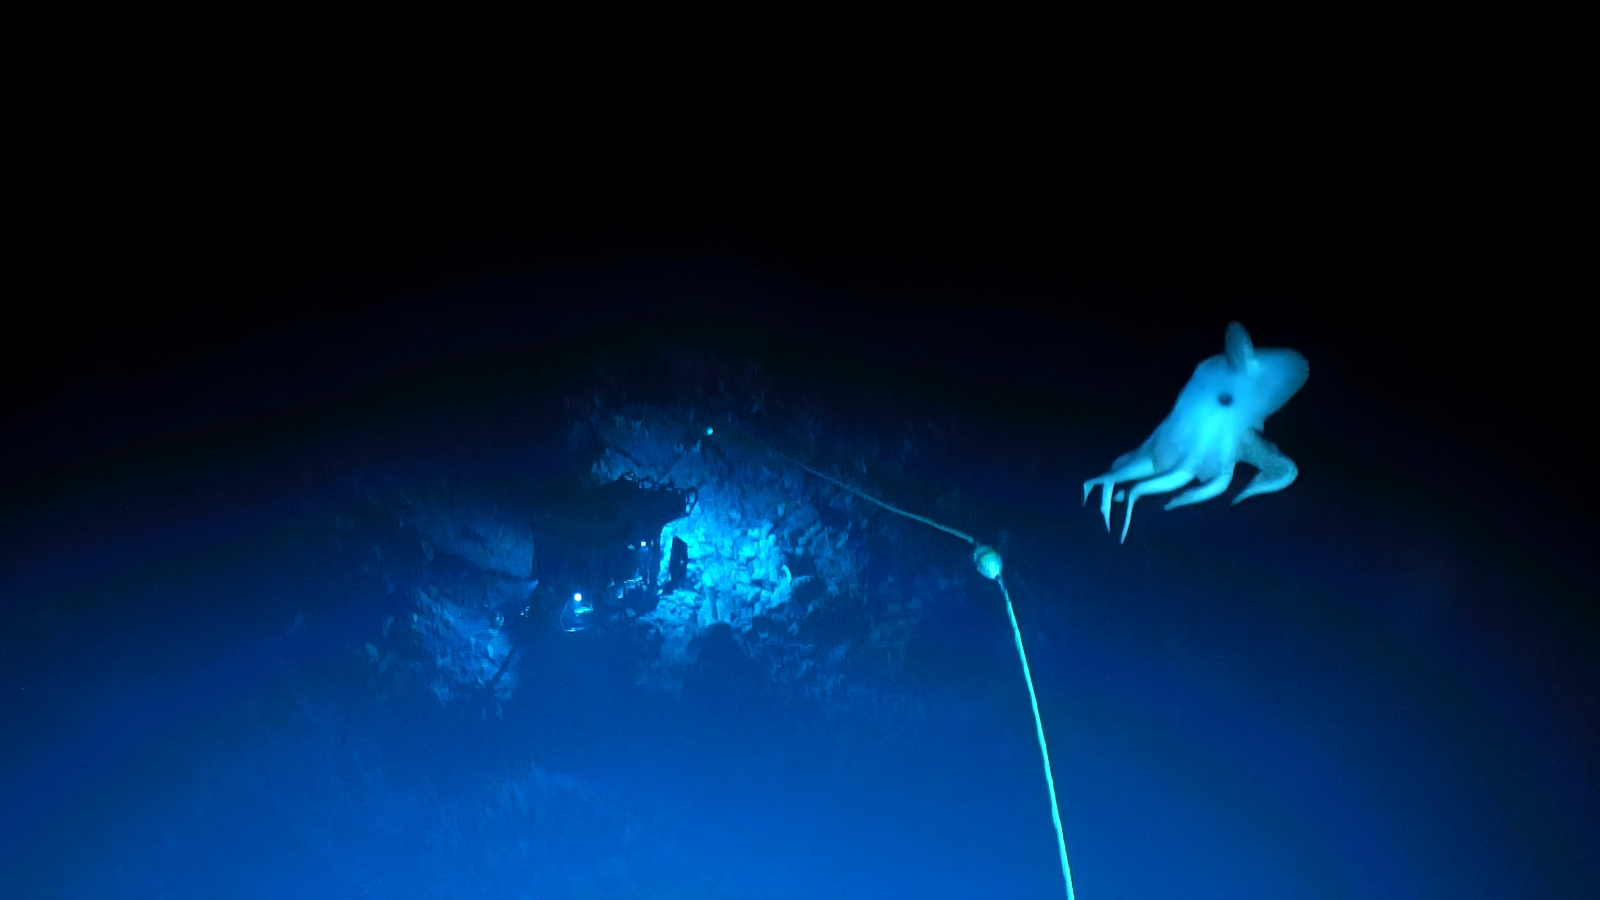 The dumbo octopus hovering near the seafloor